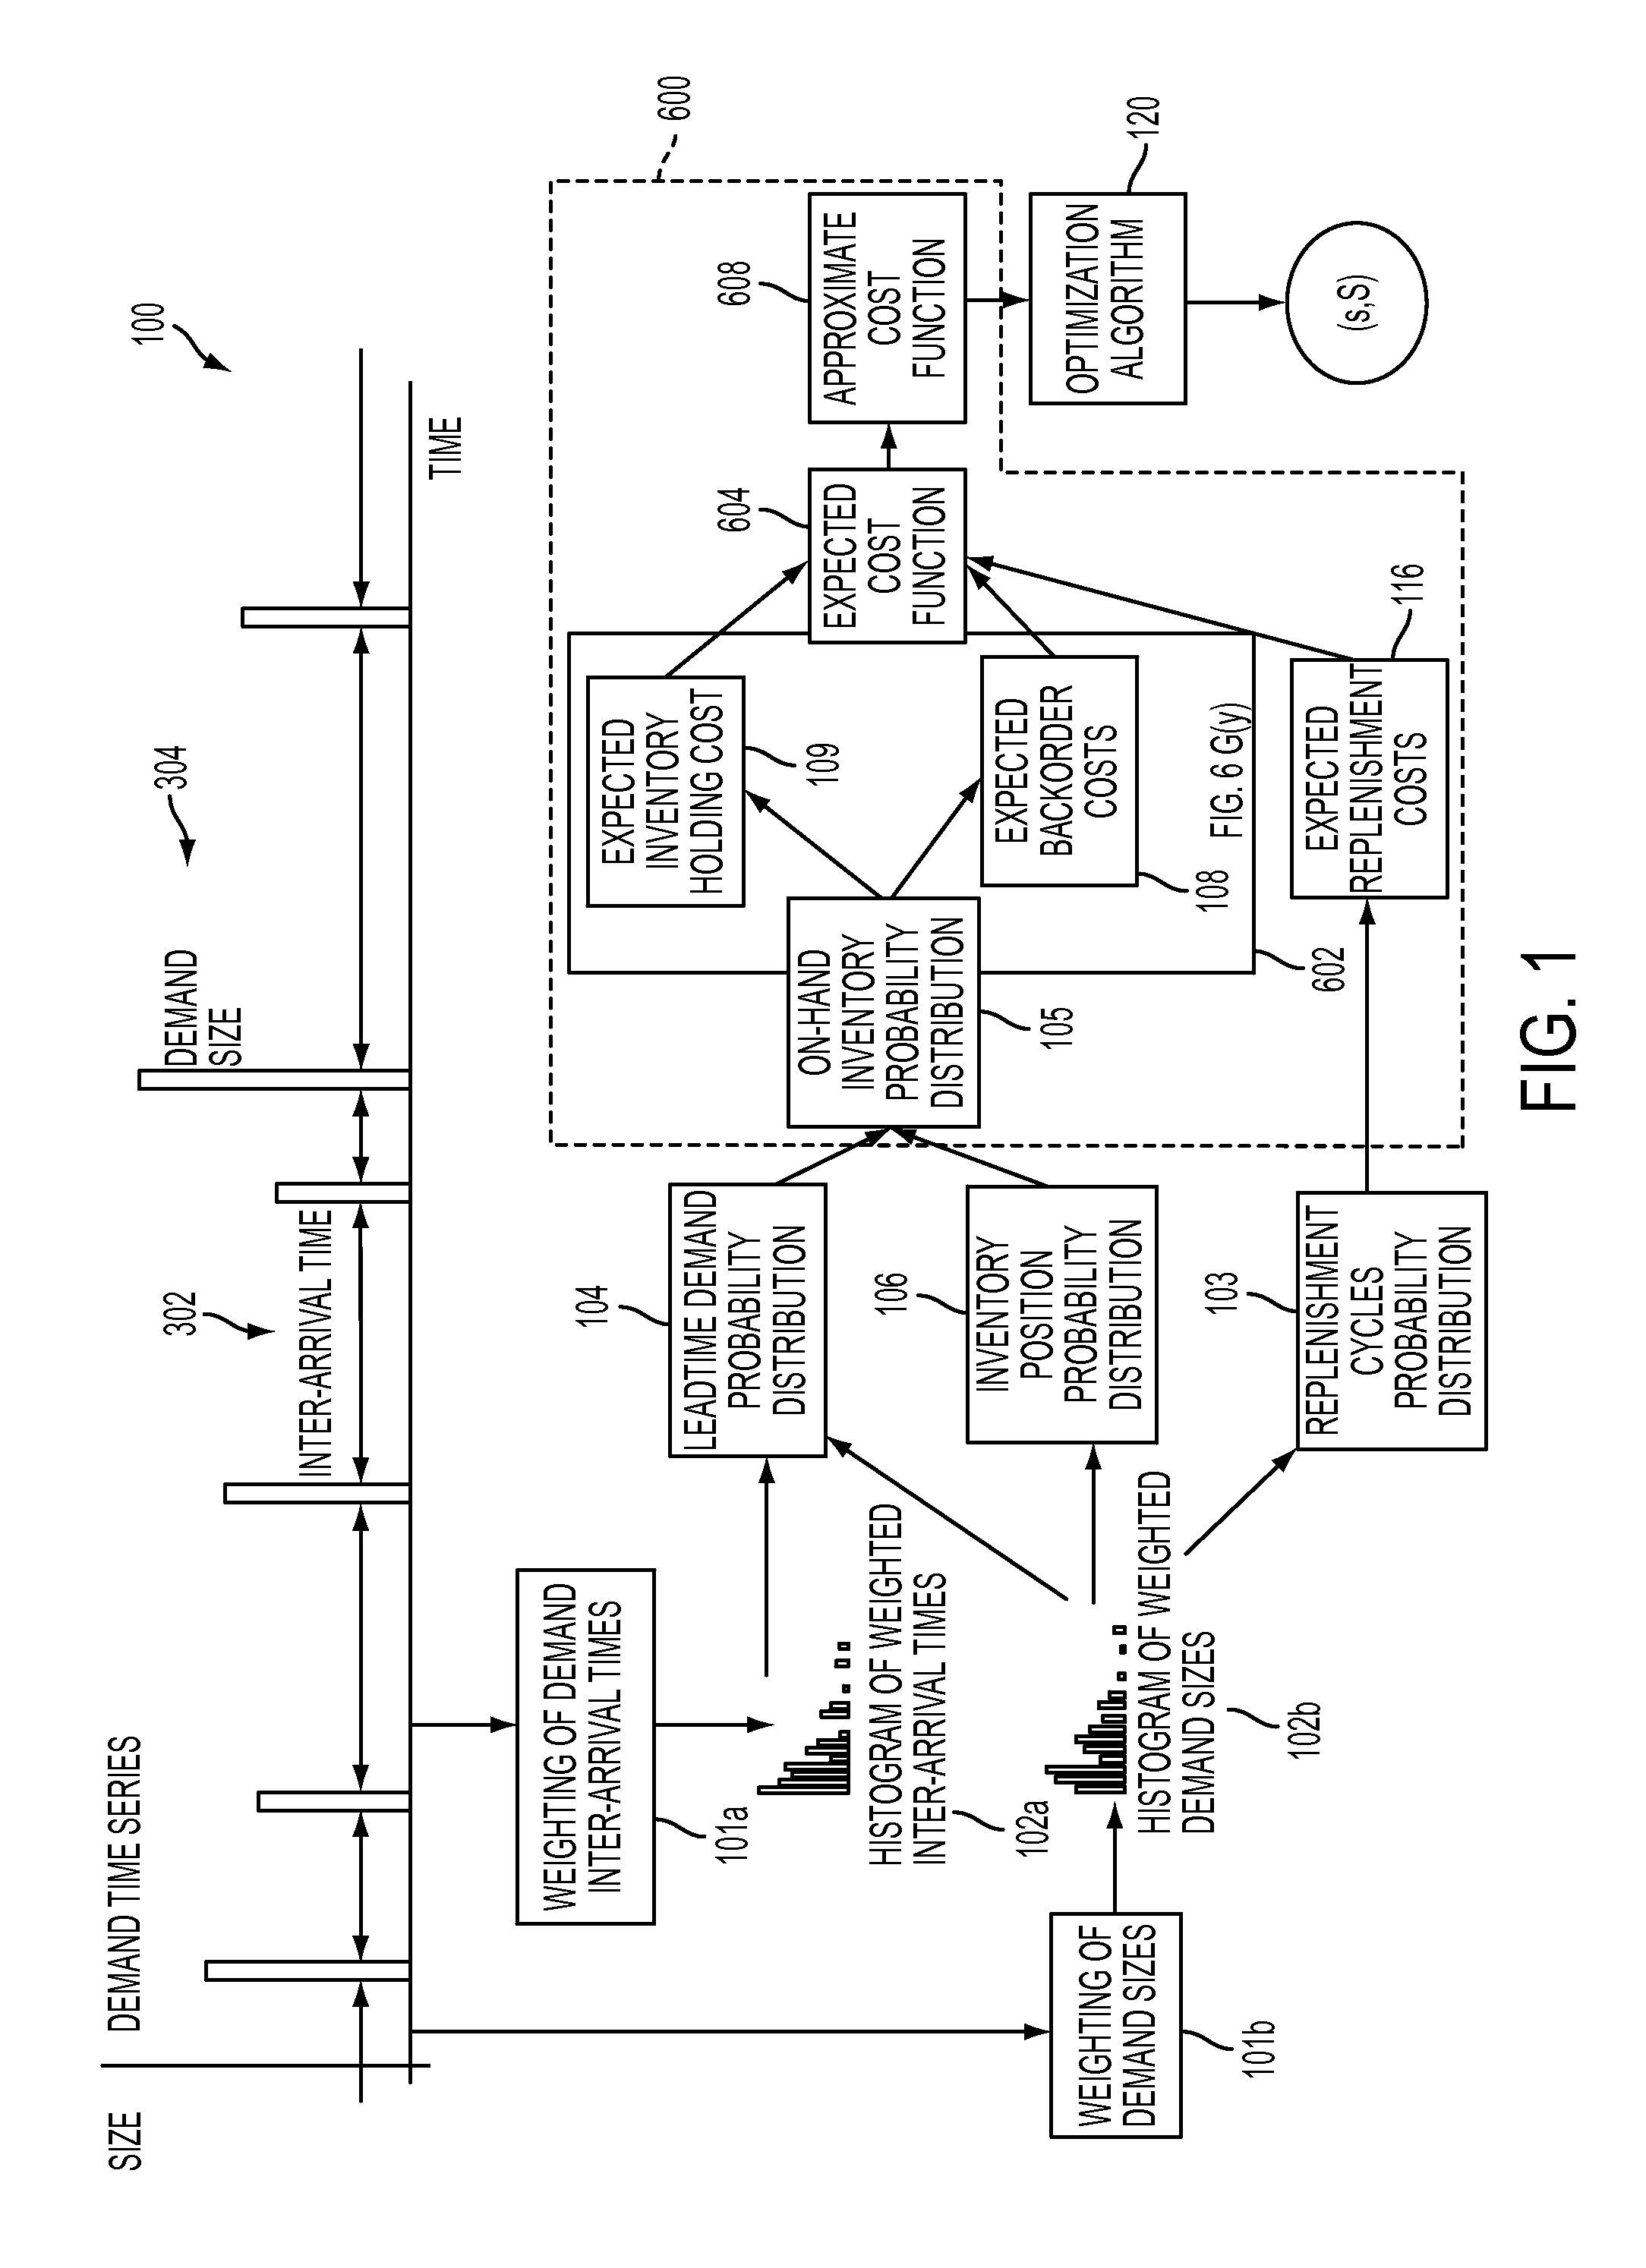 Method and computer system for settng inventory control levels from demand inter-arrival time, demand size statistics